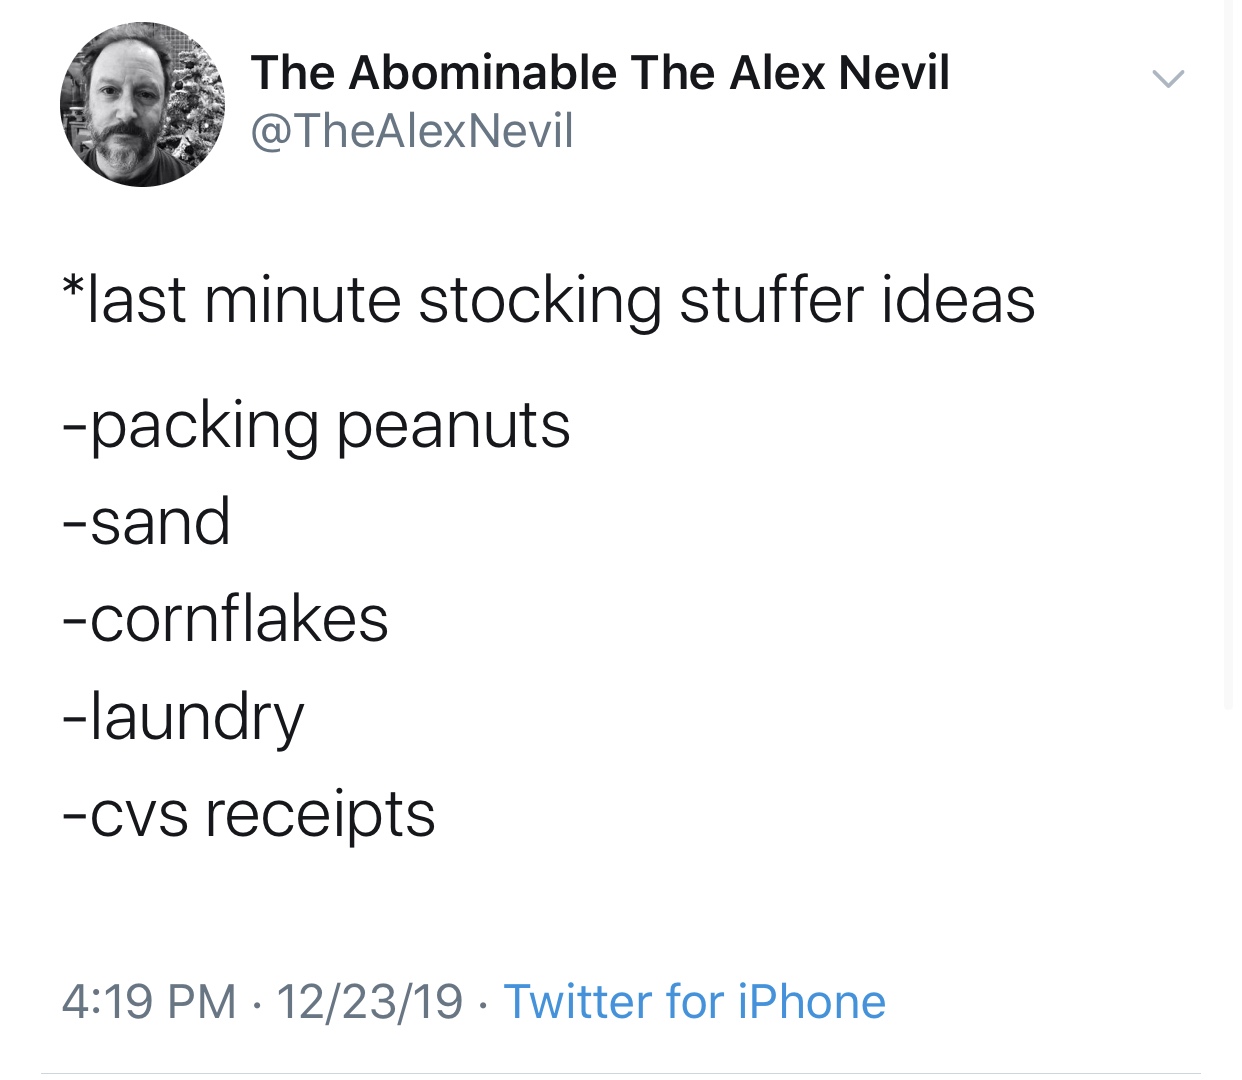 angle - The Abominable The Alex Nevil last minute stocking stuffer ideas packing peanuts sand cornflakes laundry cvs receipts 122319 Twitter for iPhone